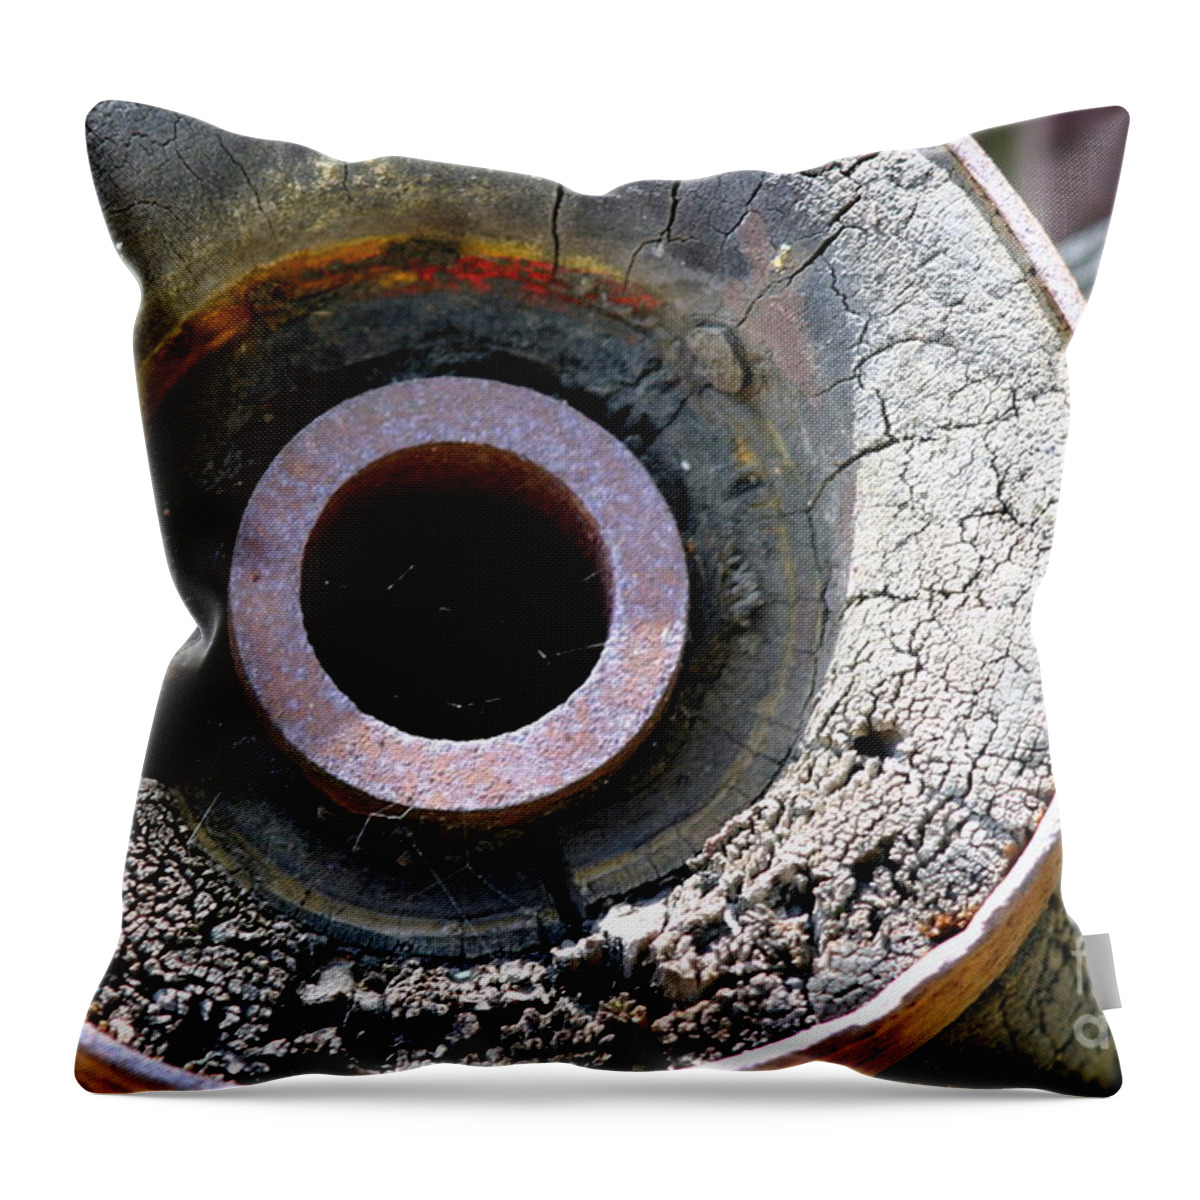 Aged Throw Pillow featuring the photograph Wooden Wheel by Henrik Lehnerer